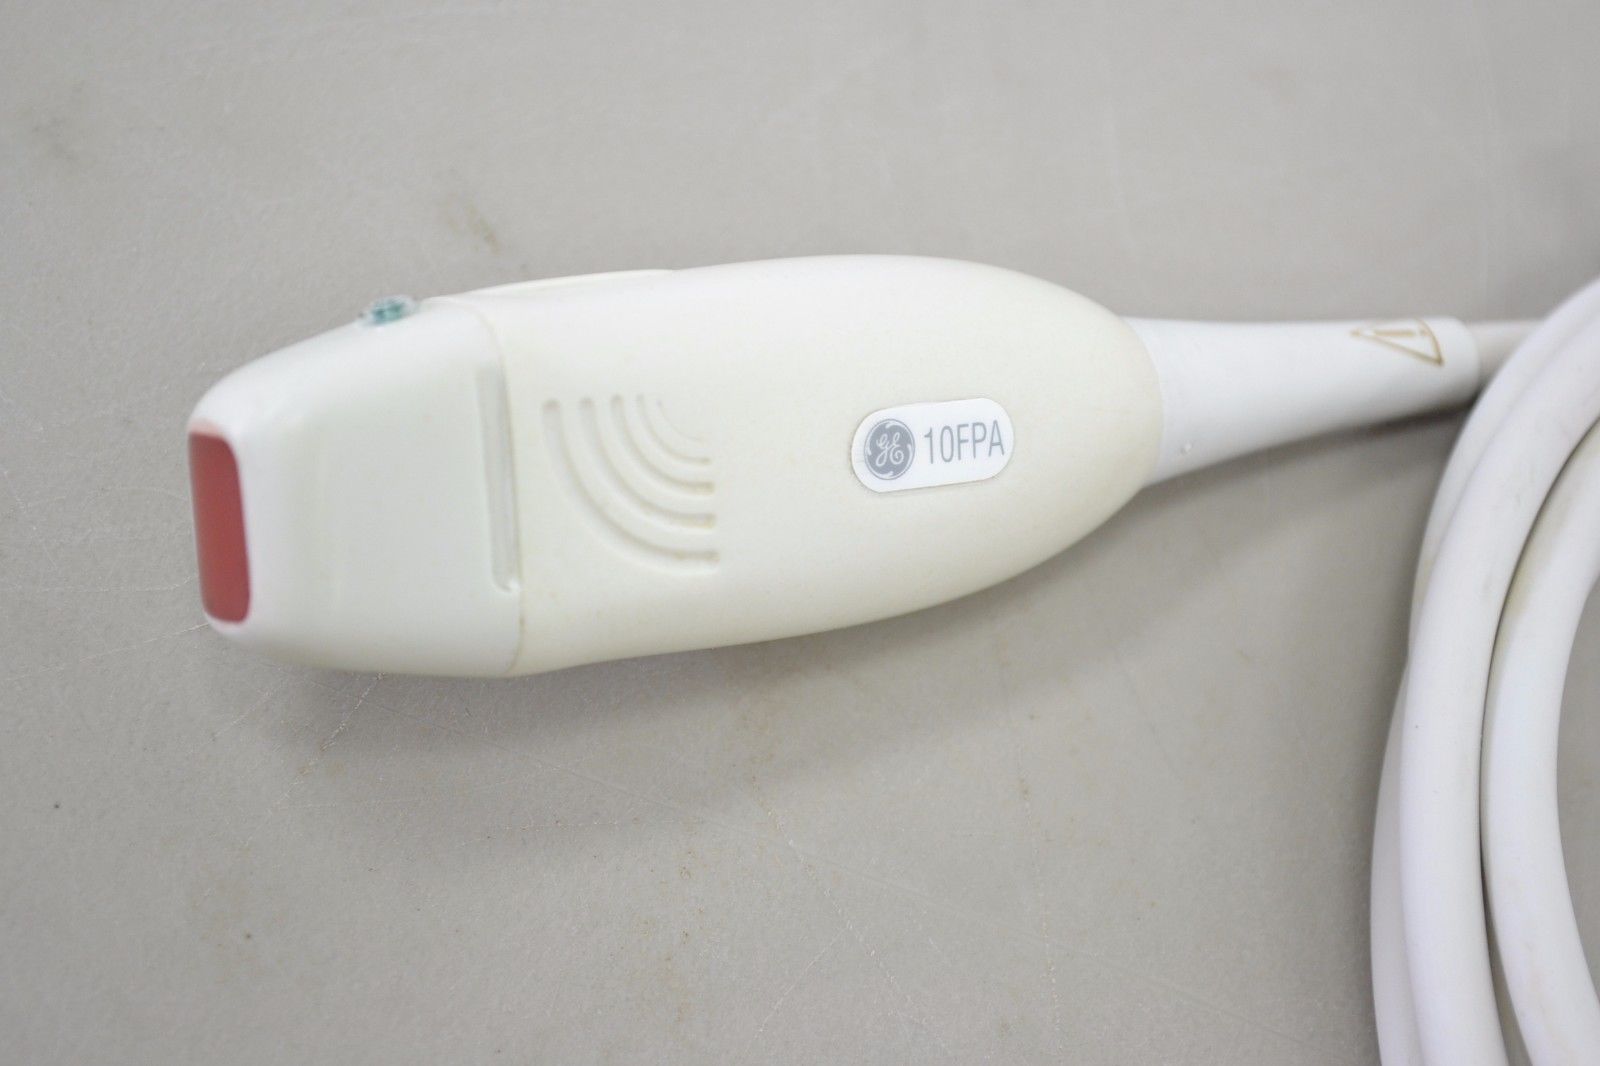 GE Vingmed 10MHZ FPA Ref KW100002 Phased Array PROBE for GE Vivid 5 (11749 B32) DIAGNOSTIC ULTRASOUND MACHINES FOR SALE